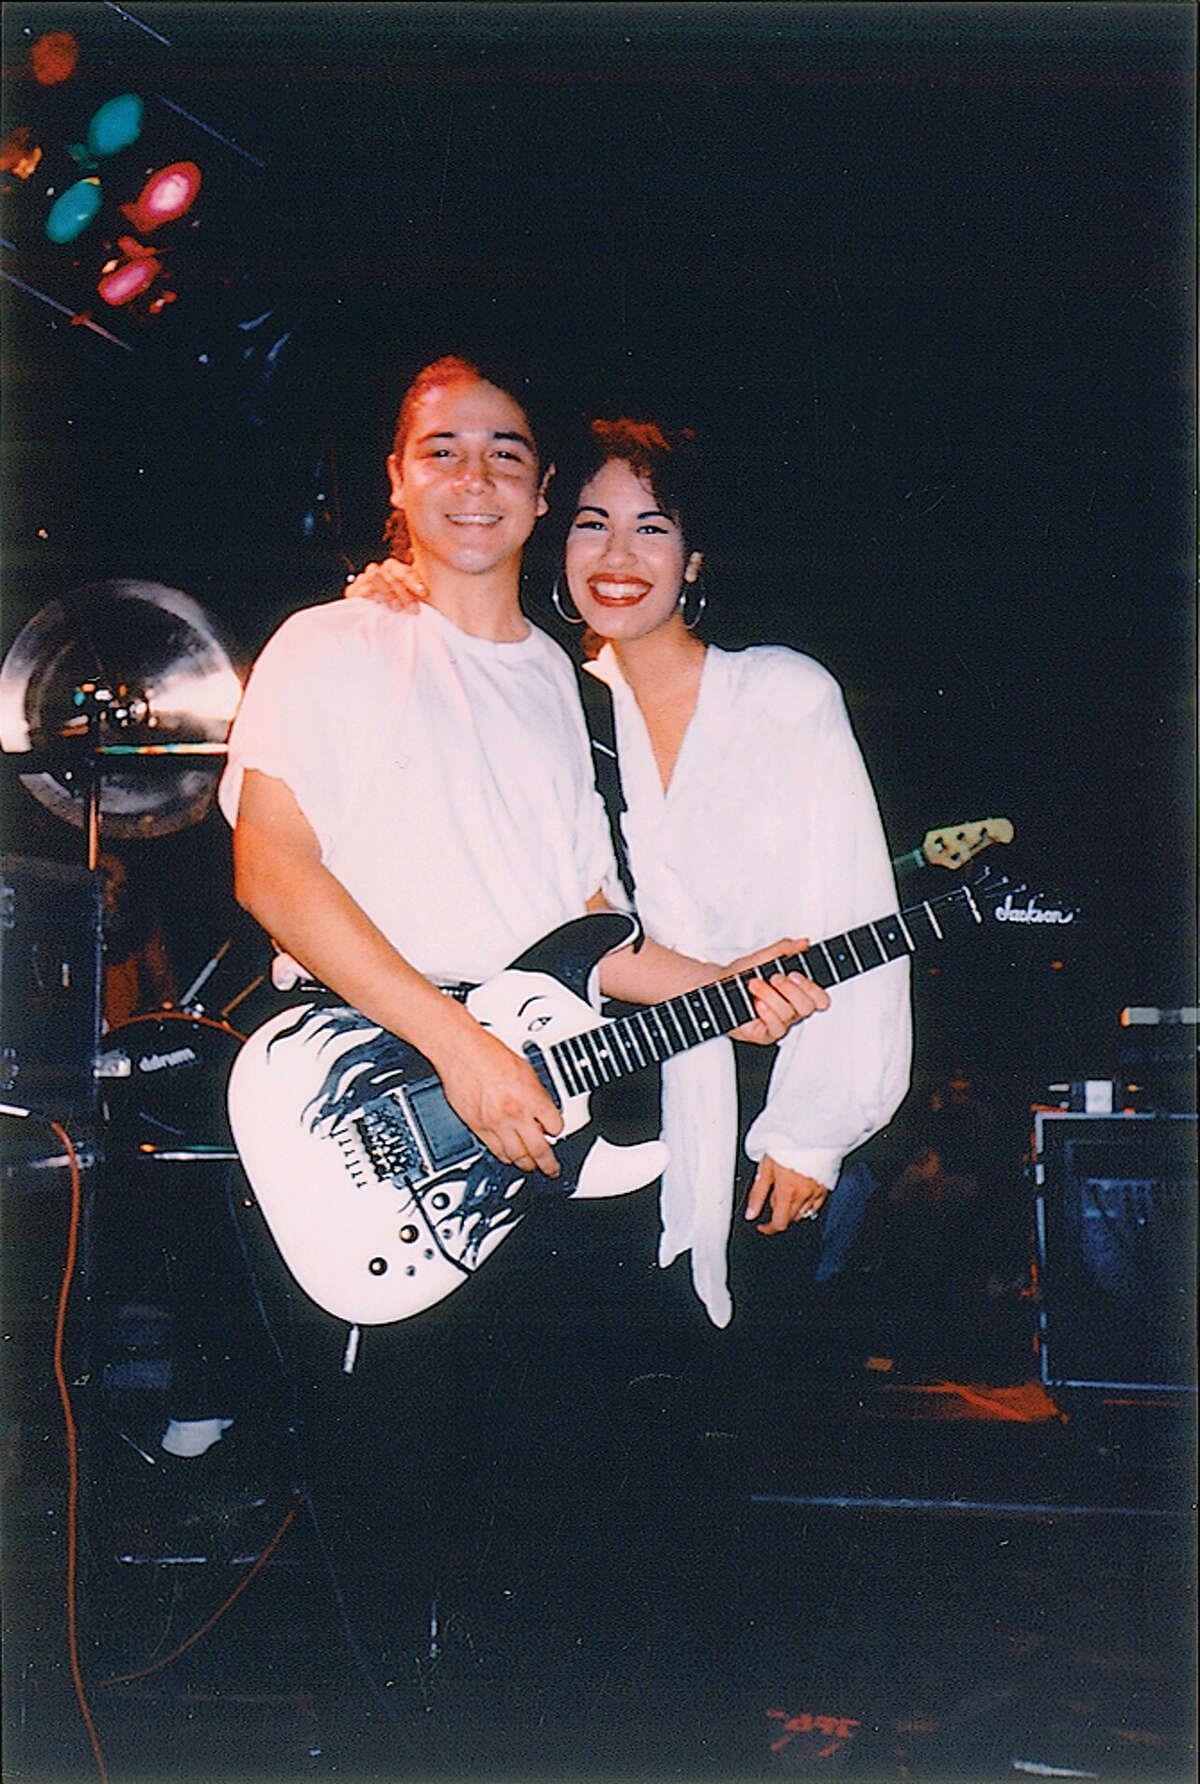 Selena onstage with her husband, guitarist Chris Perez.